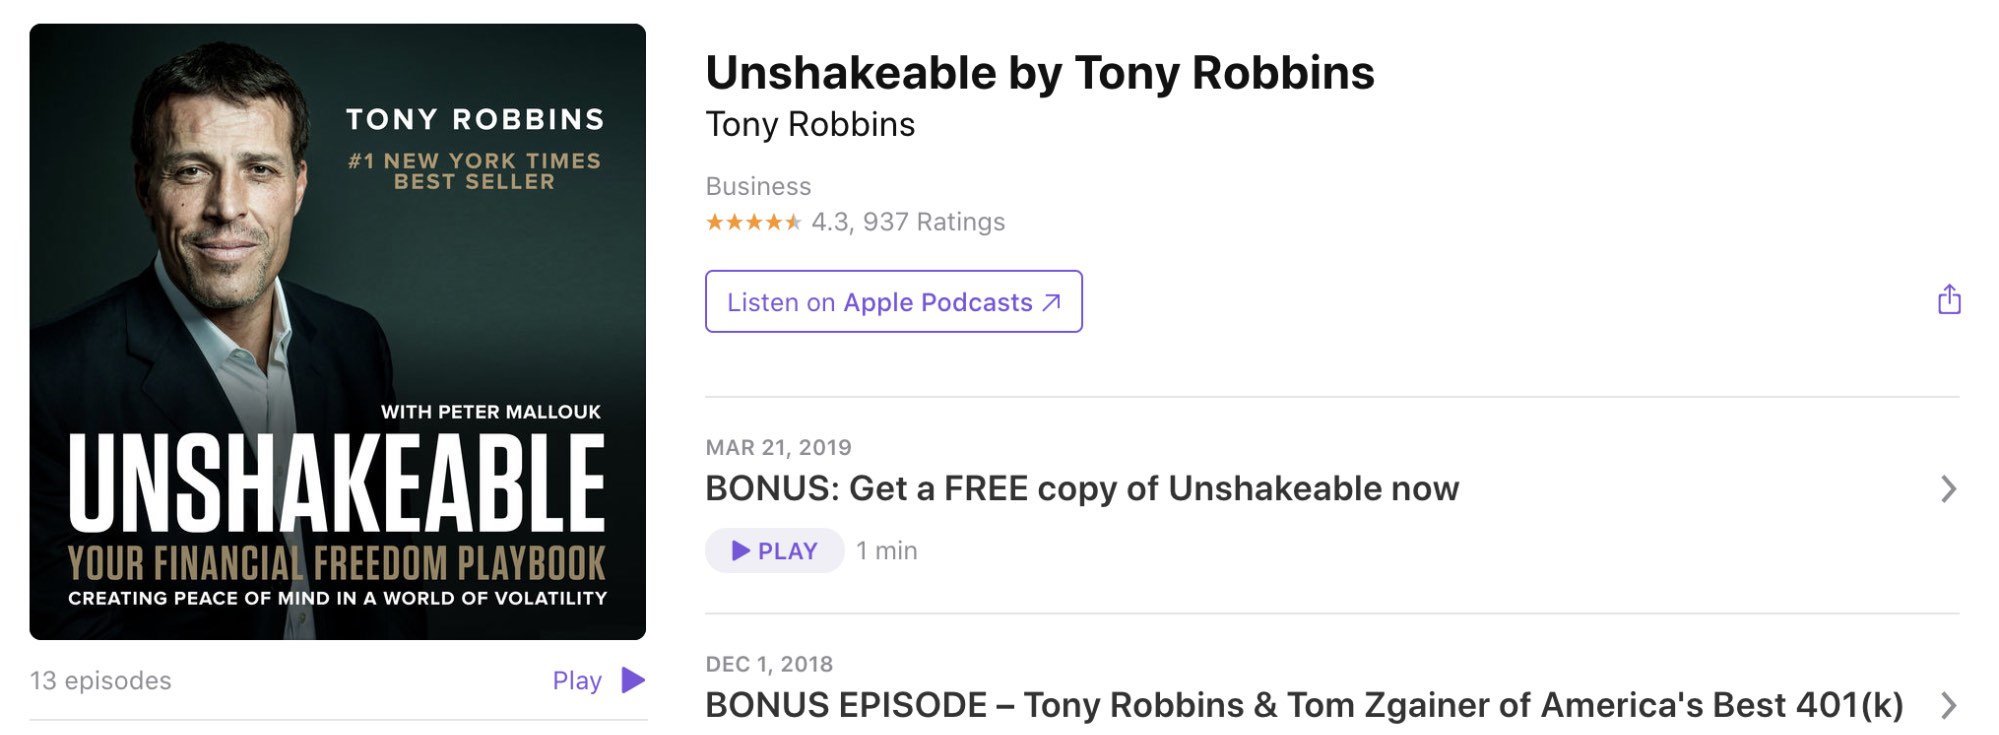 unshakeable podcast